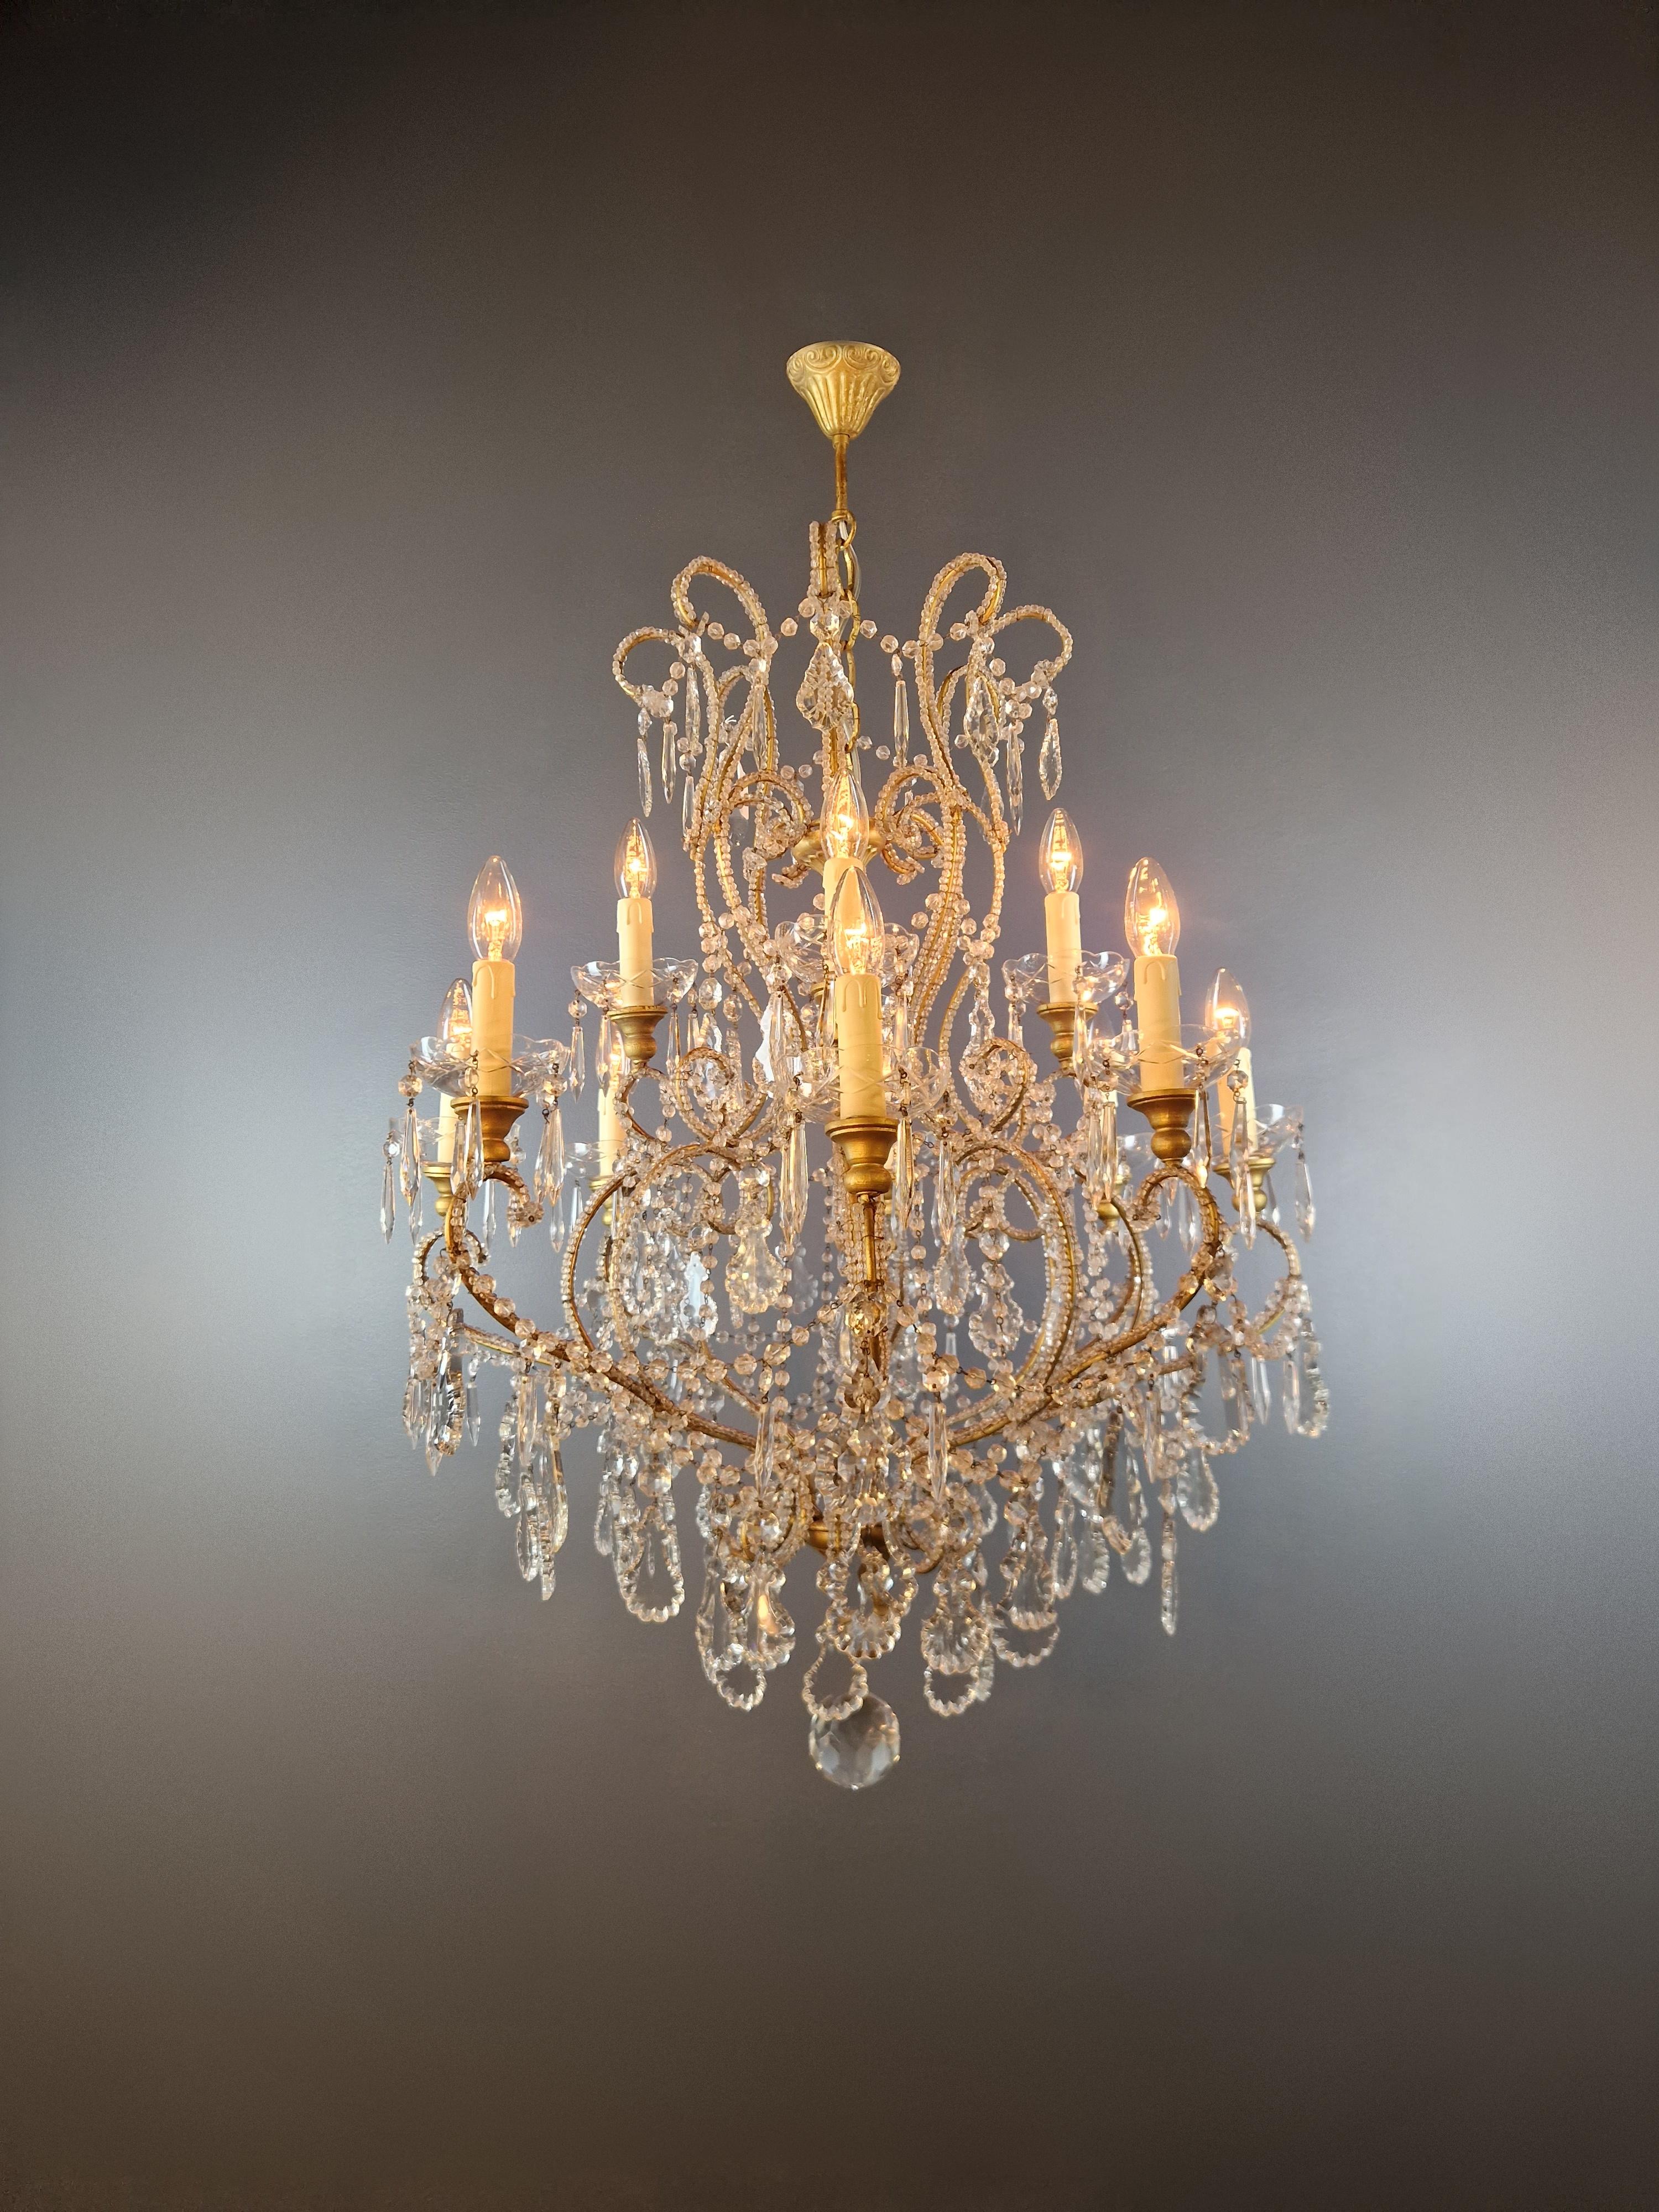 We present to you an exquisite Art Nouveau brass chandelier chandelier ceiling light - a real rarity and an antique jewel. This vintage chandelier was lovingly and professionally restored in Berlin and its electrical wiring was adapted for smooth